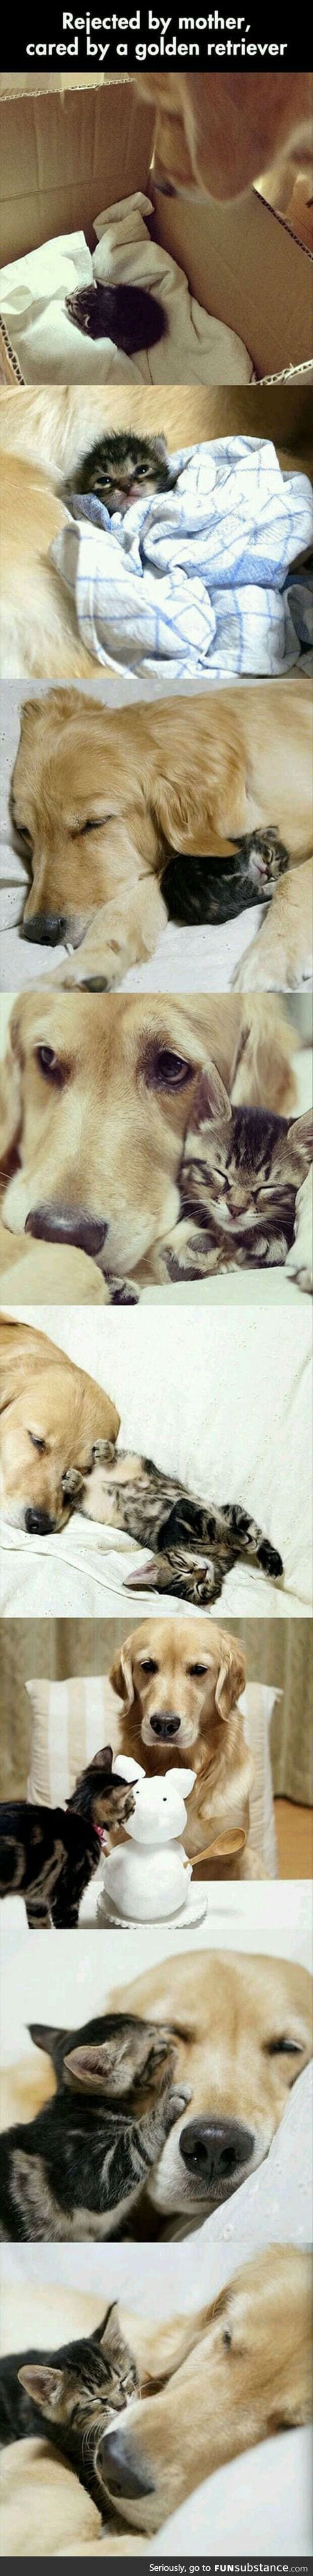 Golden retriever takes care of an abandoned kitty